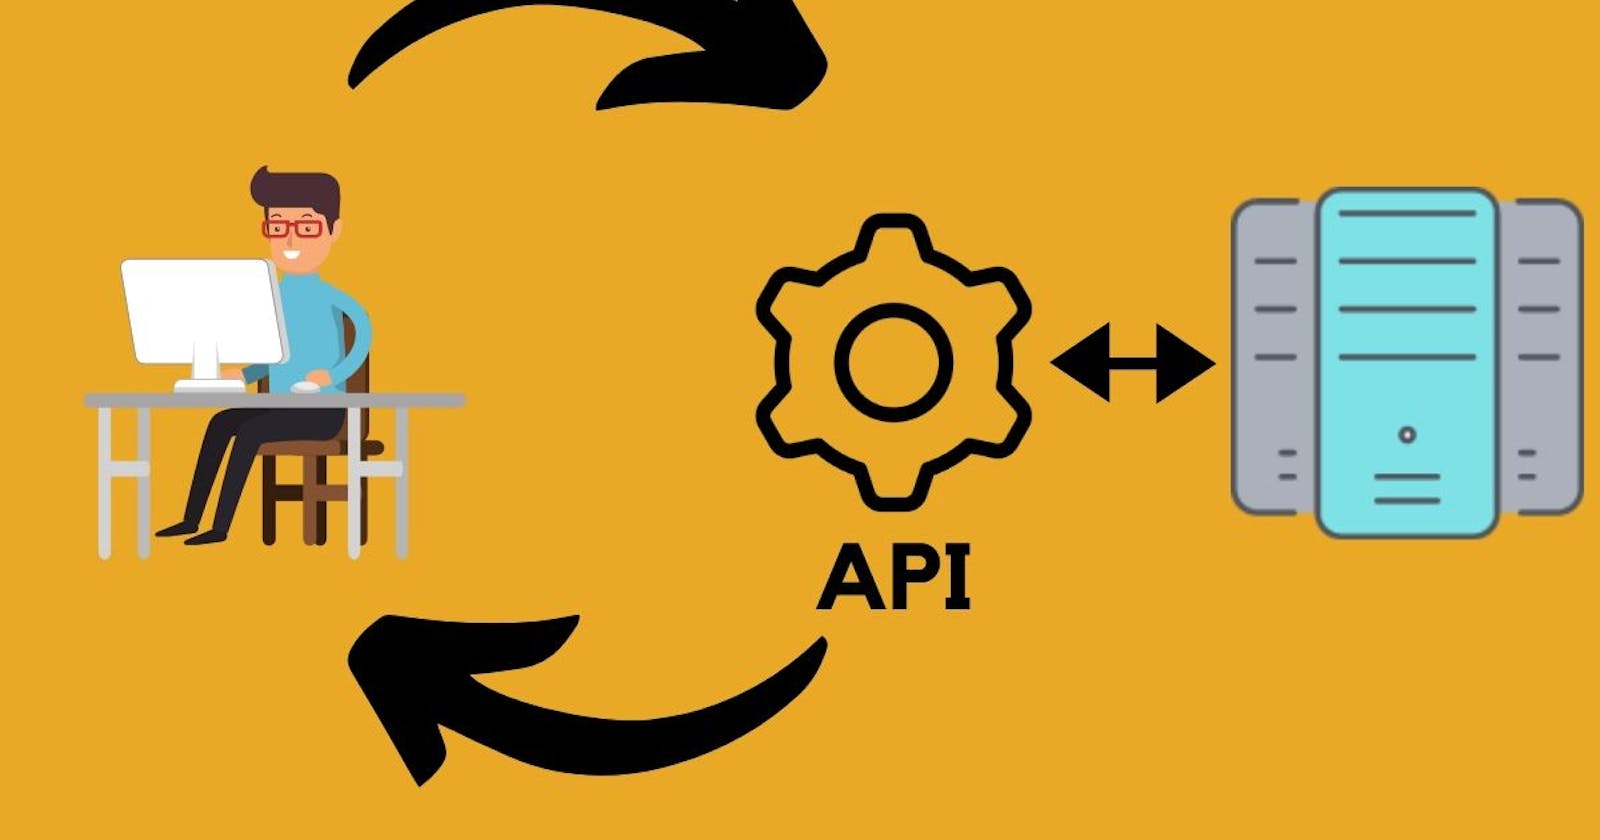 Consuming REST APIs in React using FetchAPI, Async/Await, and useEffect.